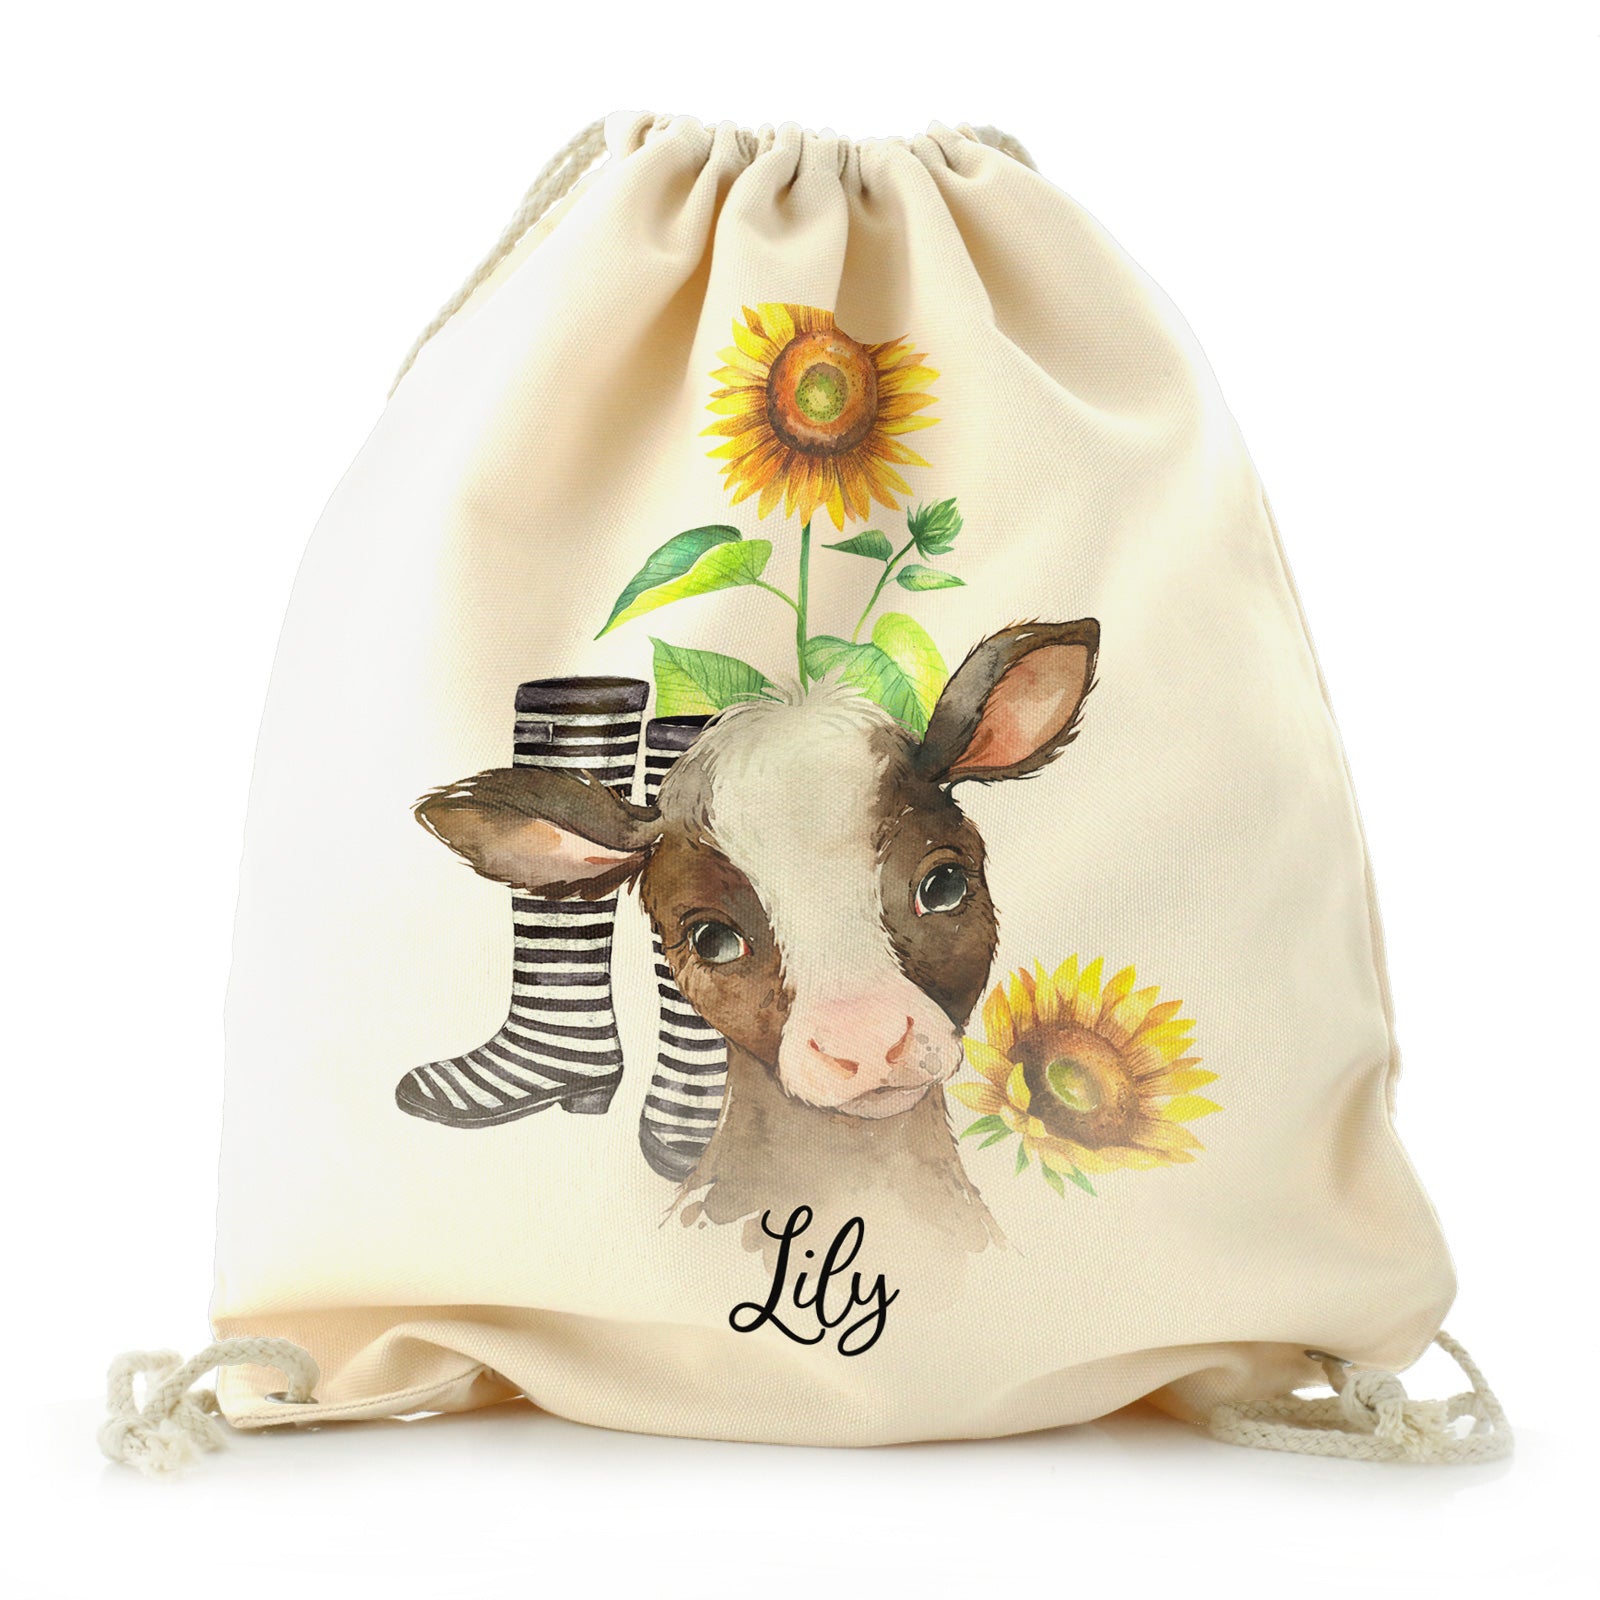 Personalised Canvas Drawstring Backpack with Brown Cow Yellow Sunflowers and Cute Text